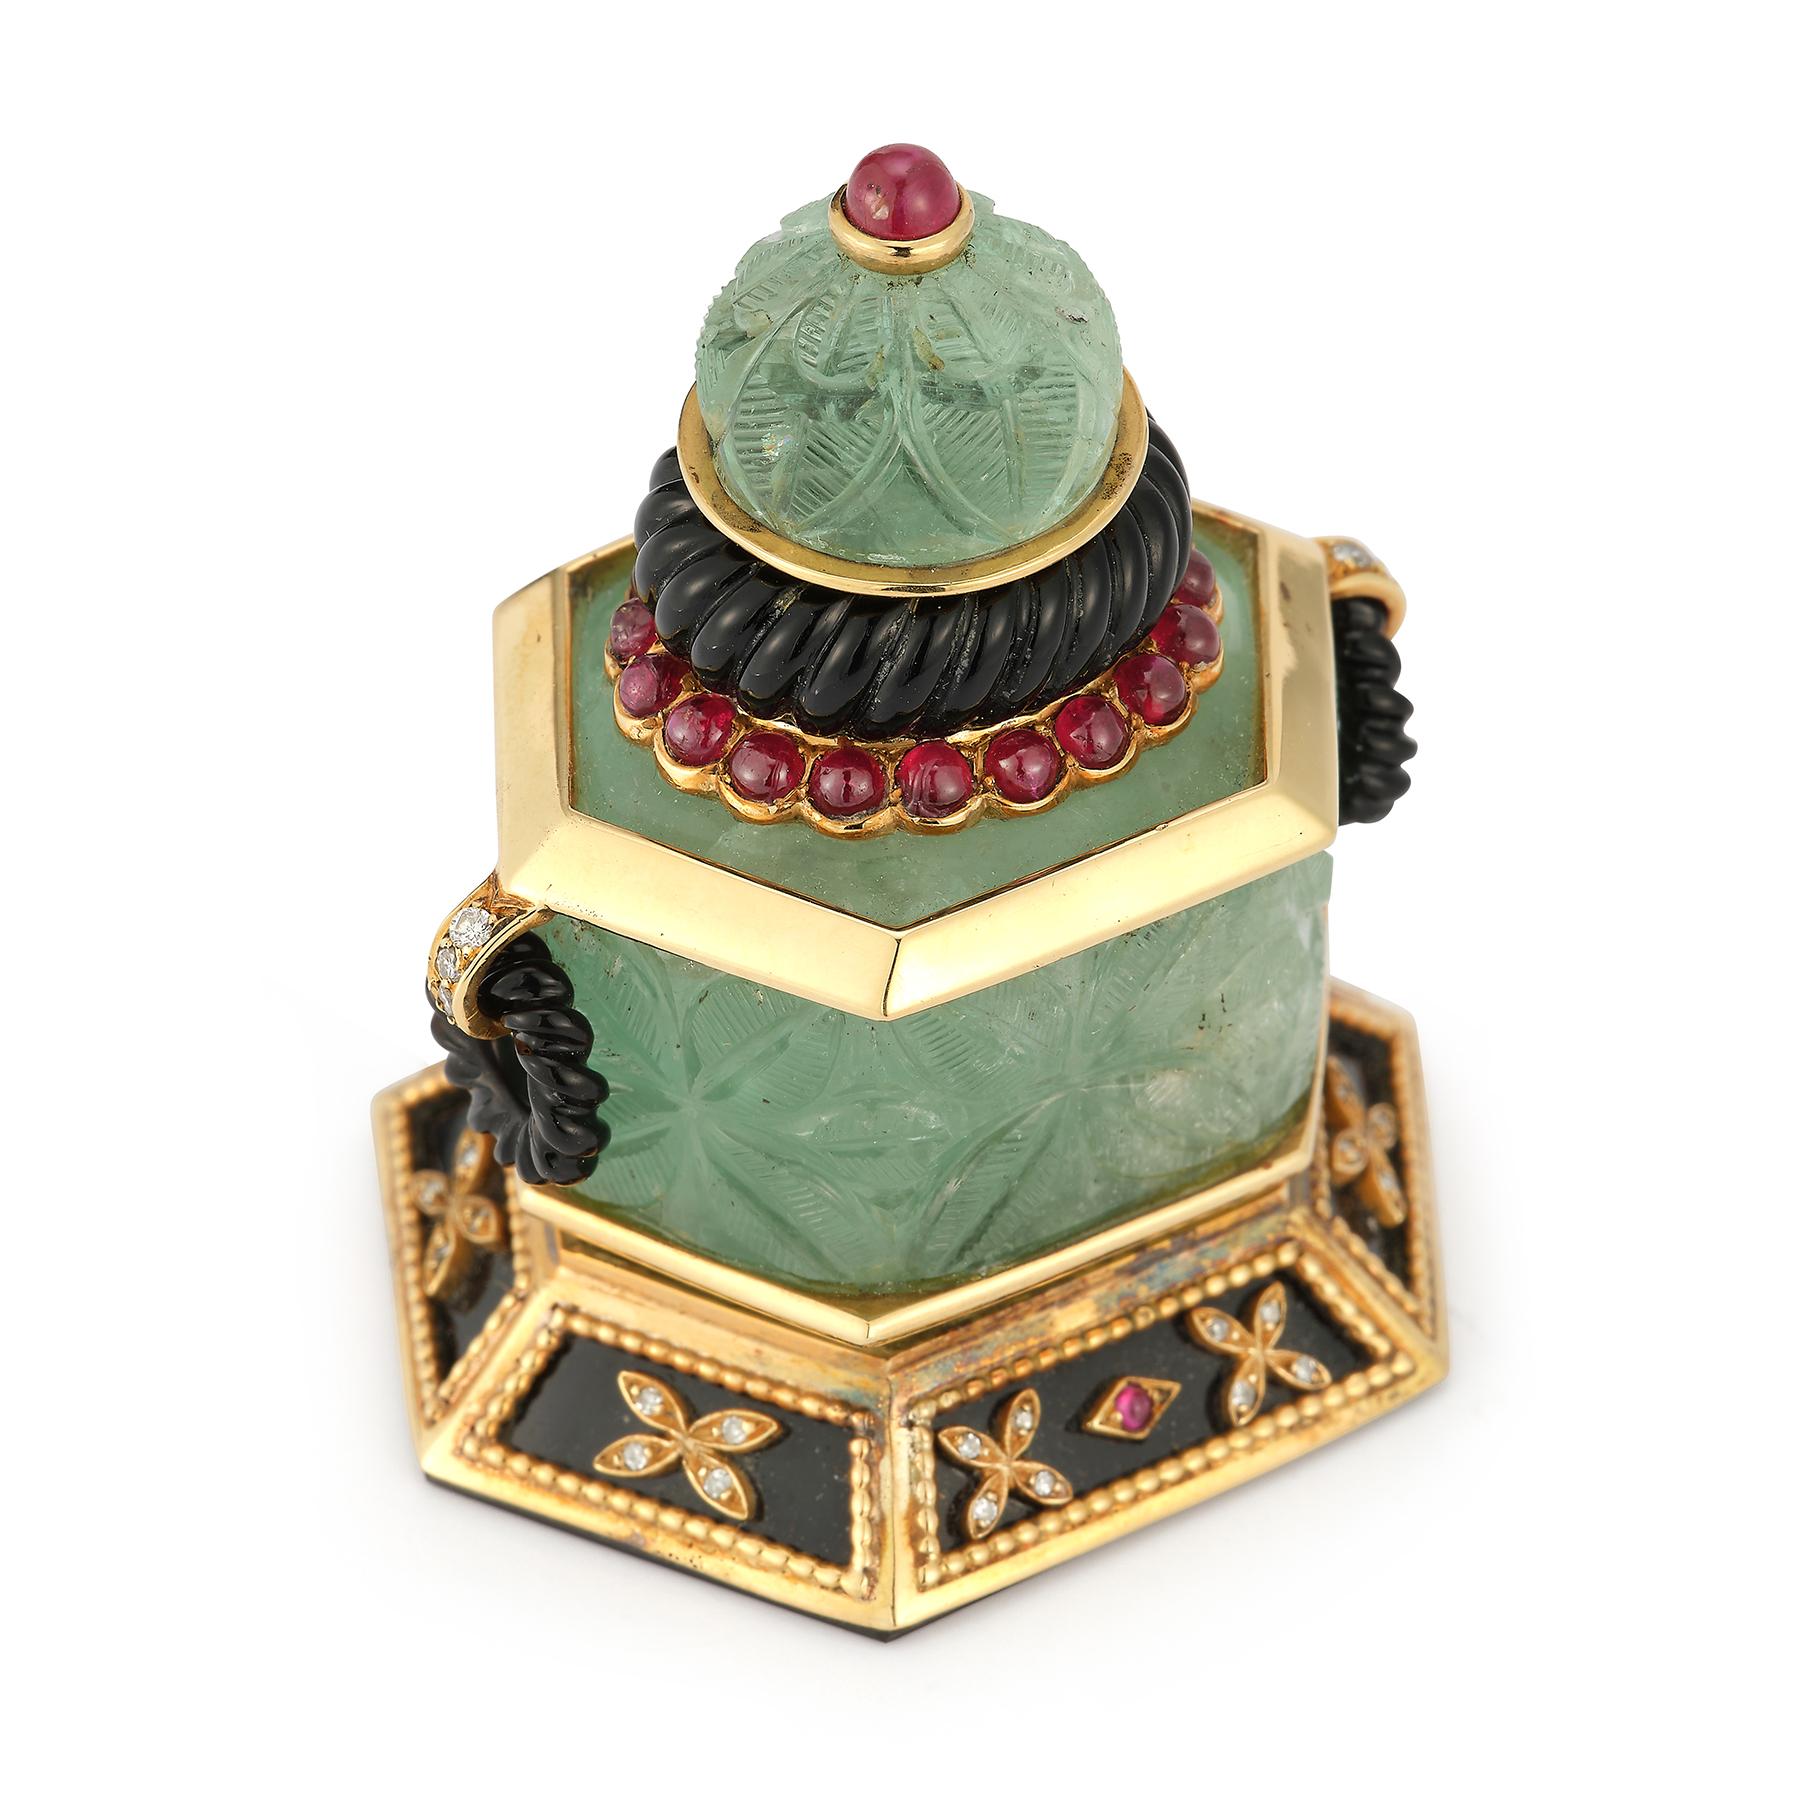 Carved Emerald Perfume Bottle or flask or snuff bottle by Mappin and Webb

Consisting of carved emeralds, onyx, cabochon rubies, &  round cut diamonds. 

Measurements: 2